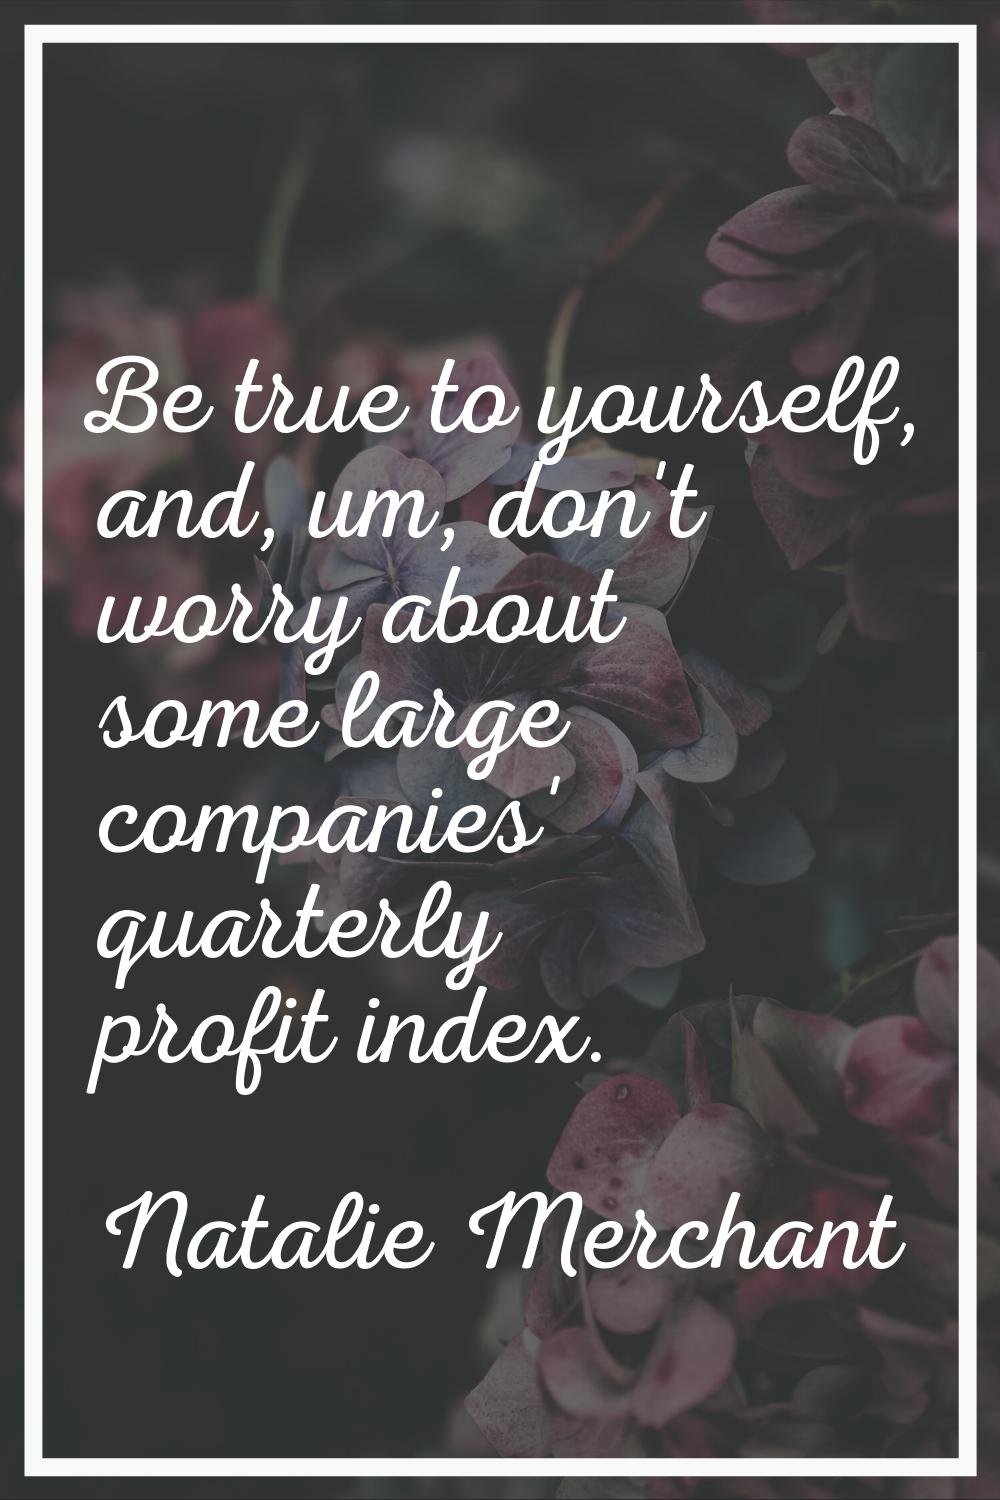 Be true to yourself, and, um, don't worry about some large companies' quarterly profit index.